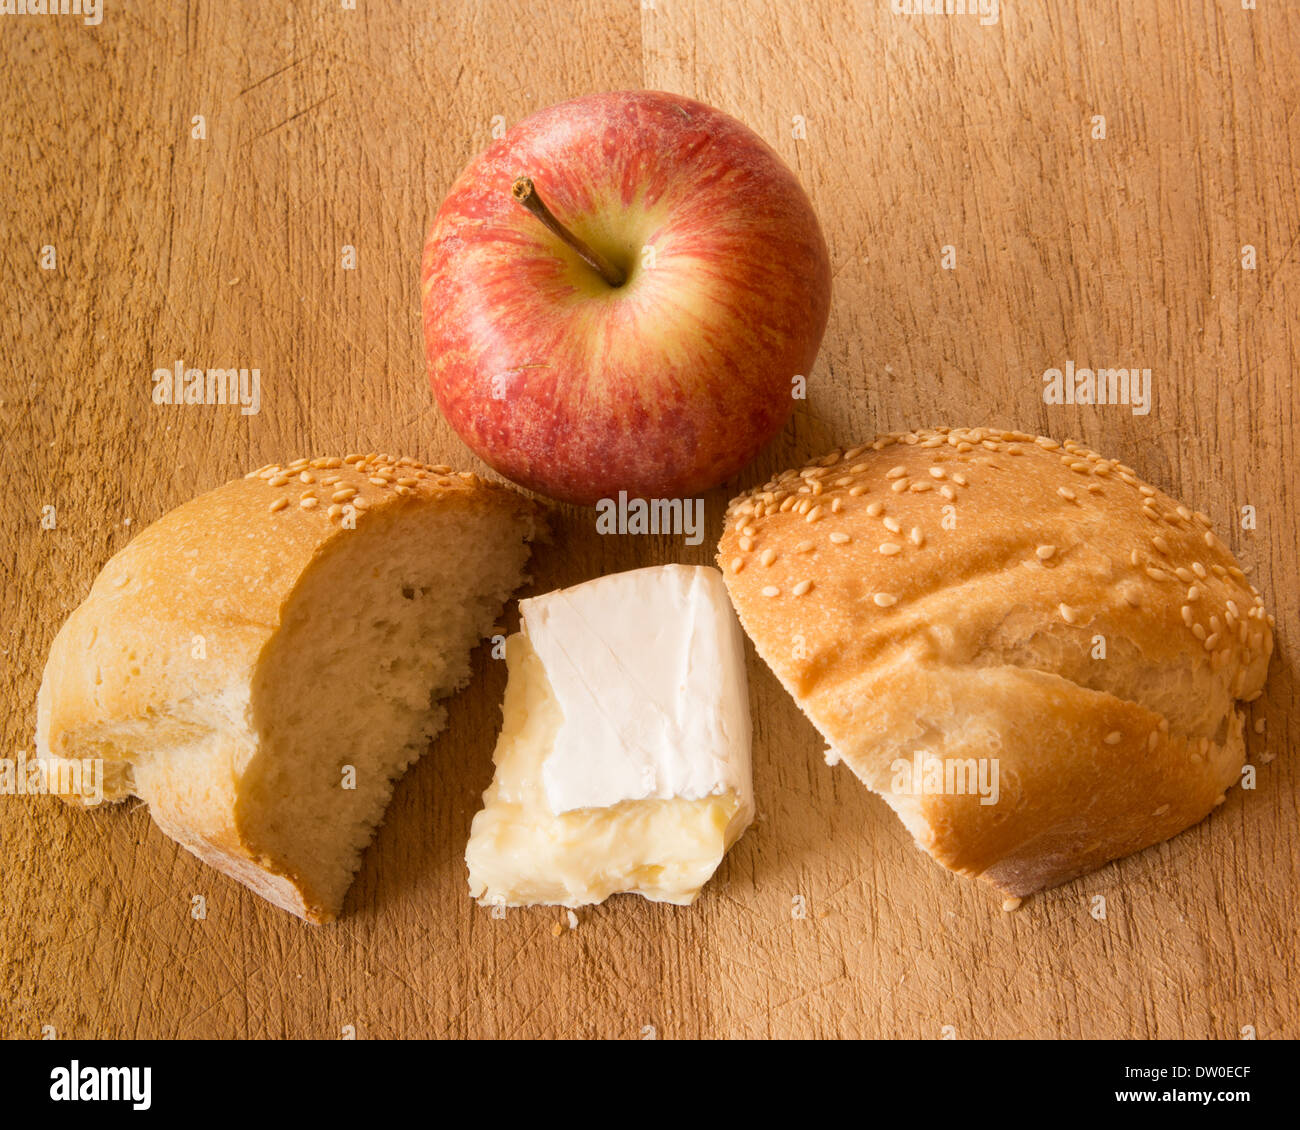 Apple, bread and cheese on a timber surface. Stock Photo